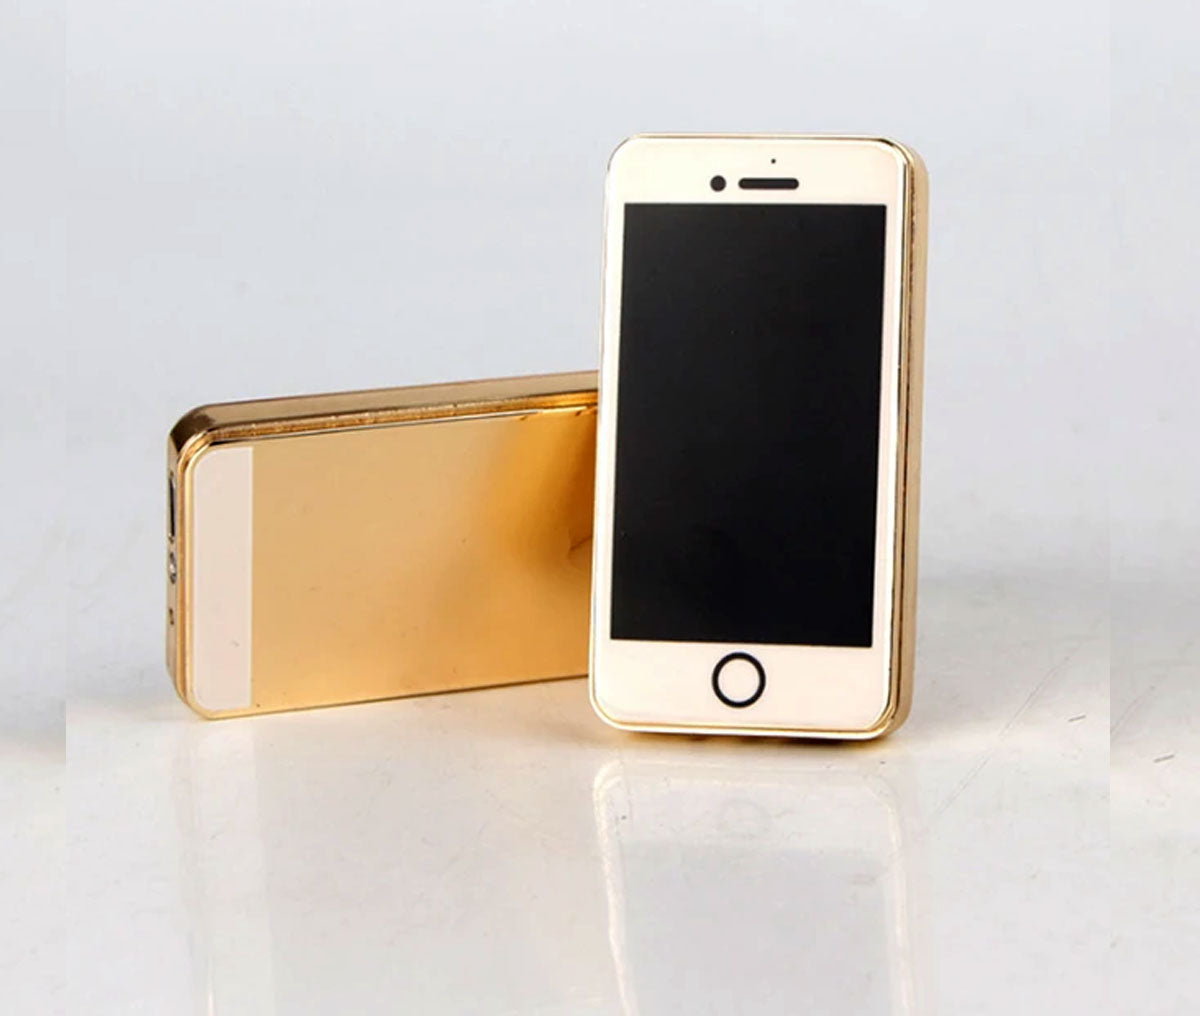 iPhone Mini Rechargeable Lighter - Pocket-Sized Flameless Gadget -USB Rechargeable & Windproof